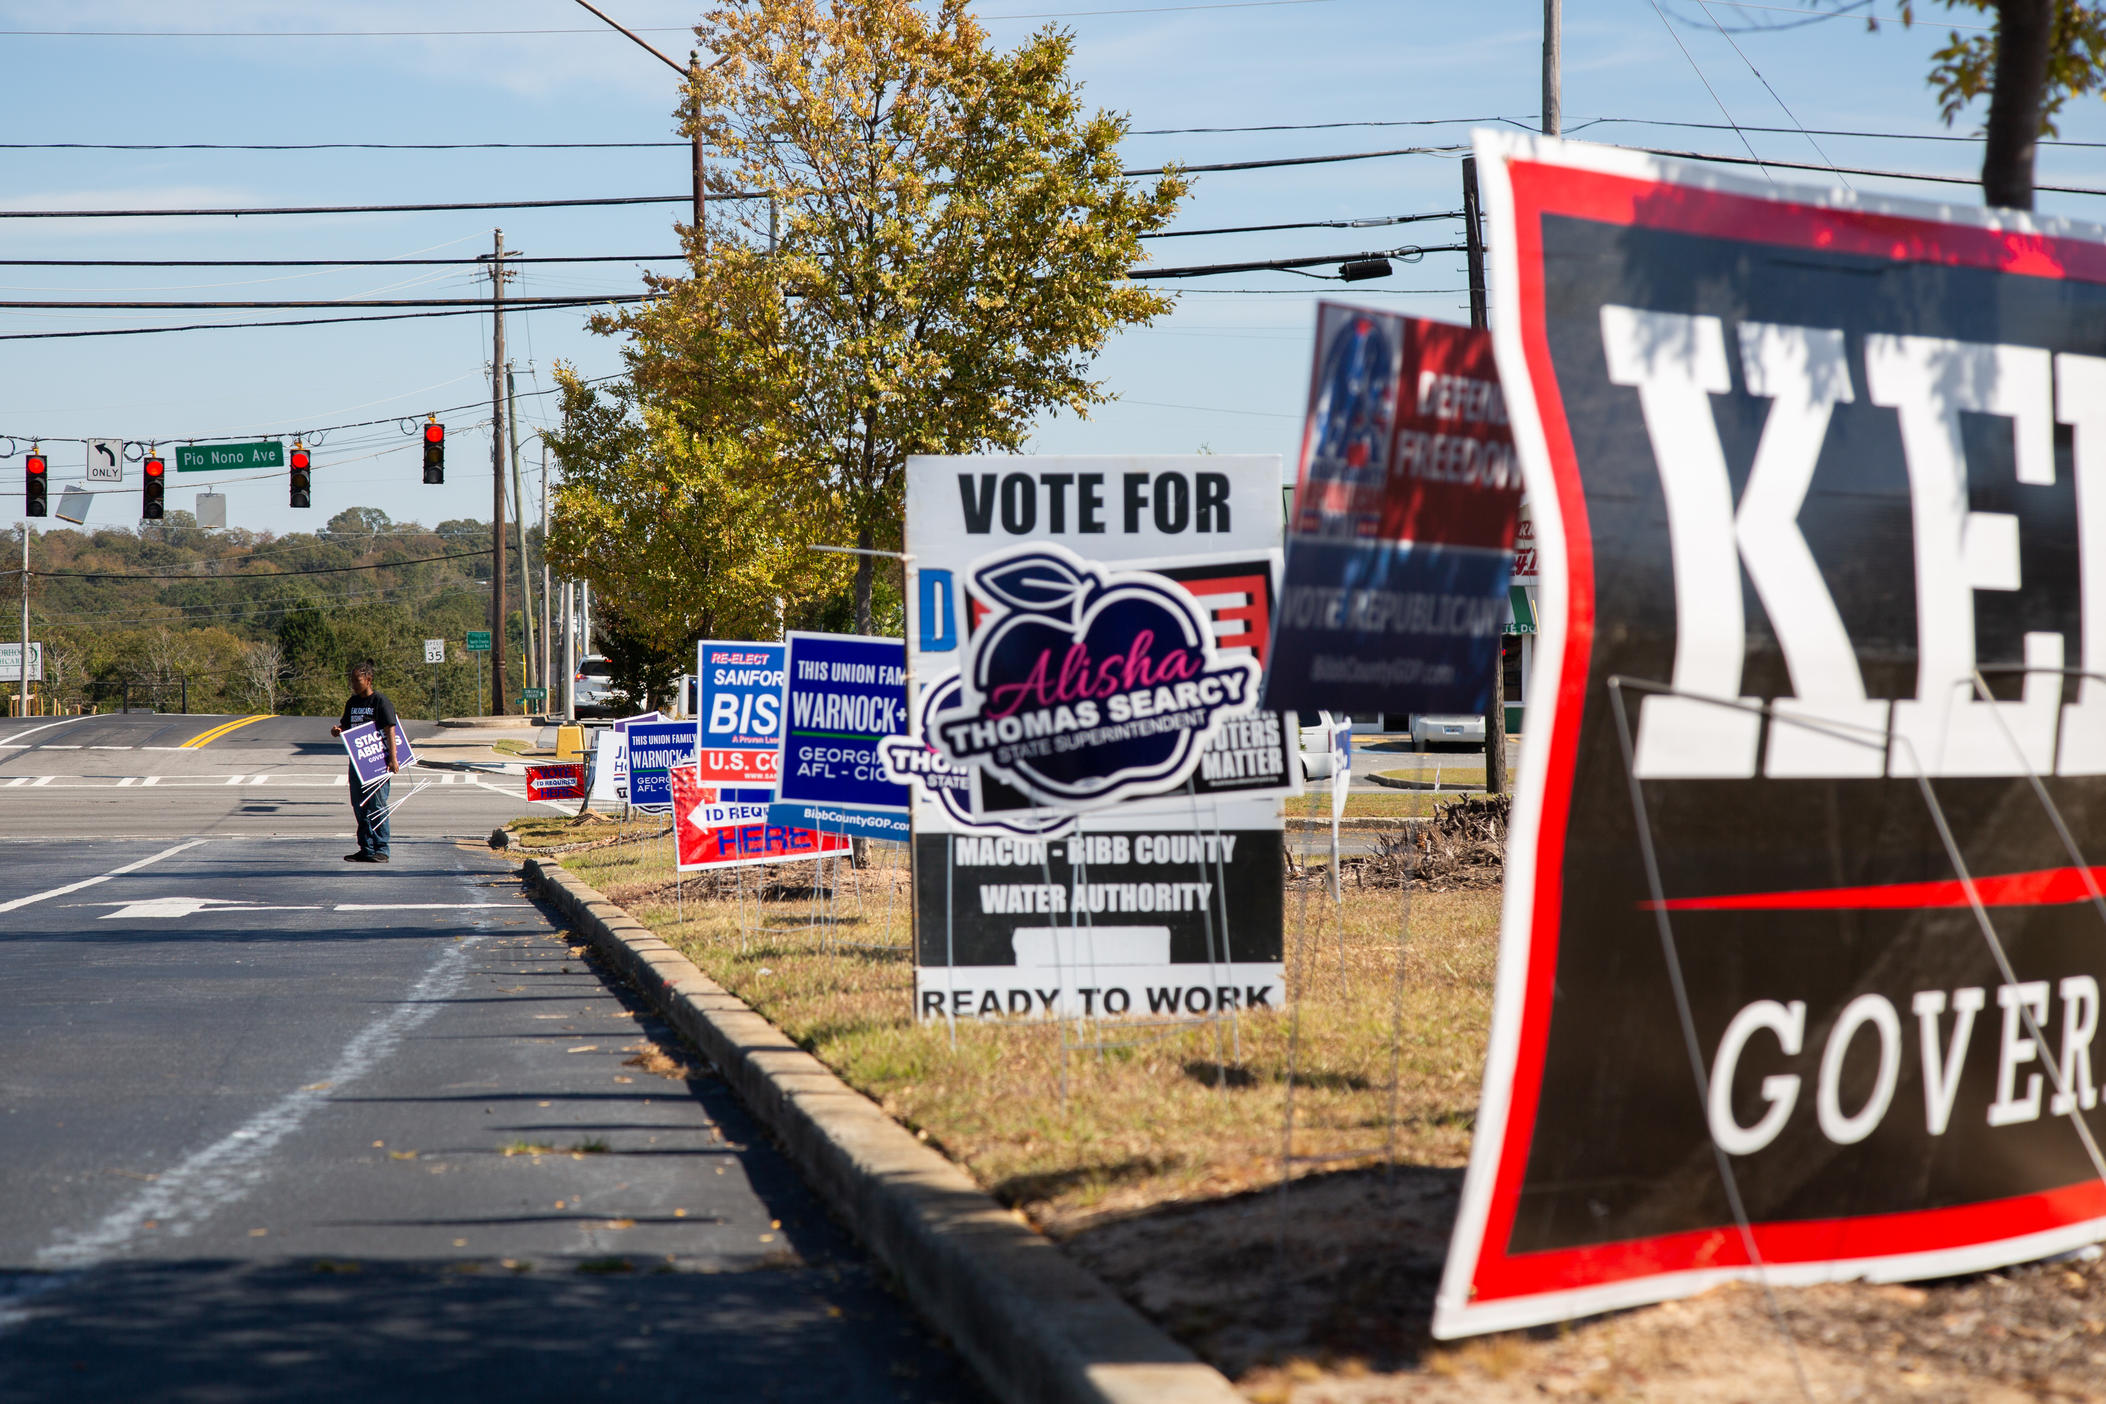 Voters in Bibb County take advantage of Sunday Voting on Oct. 23, 2022 in Macon, Georgia, ahead of the November midterm election.